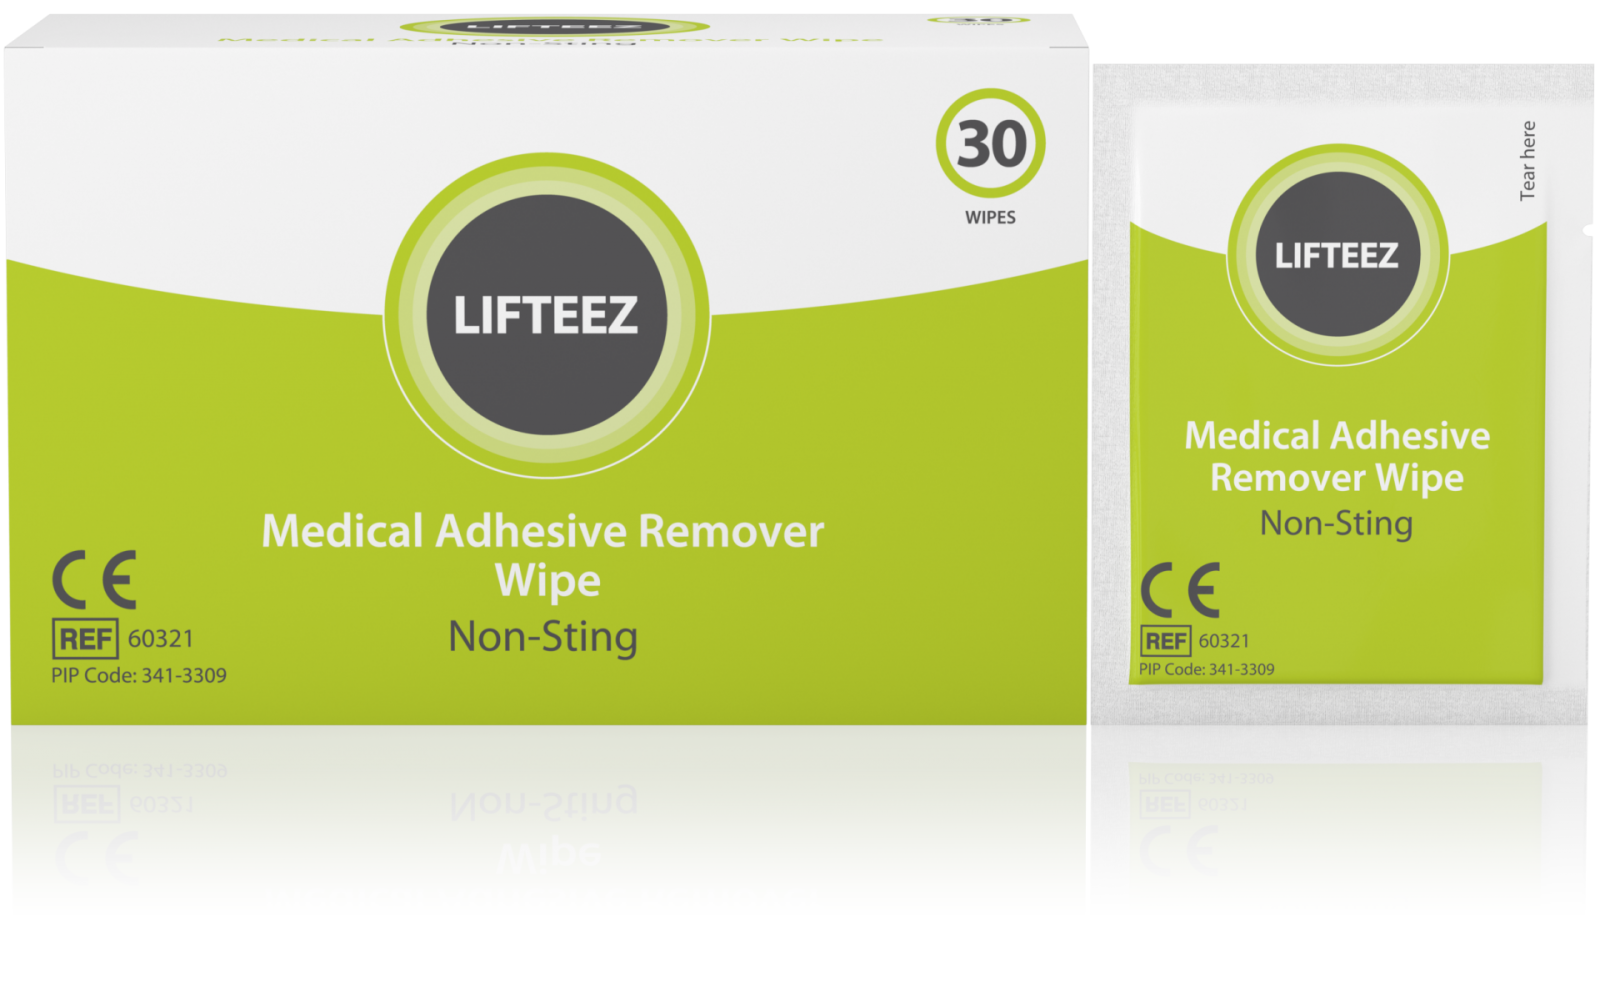 Lifteez Medical Adhesive Remover